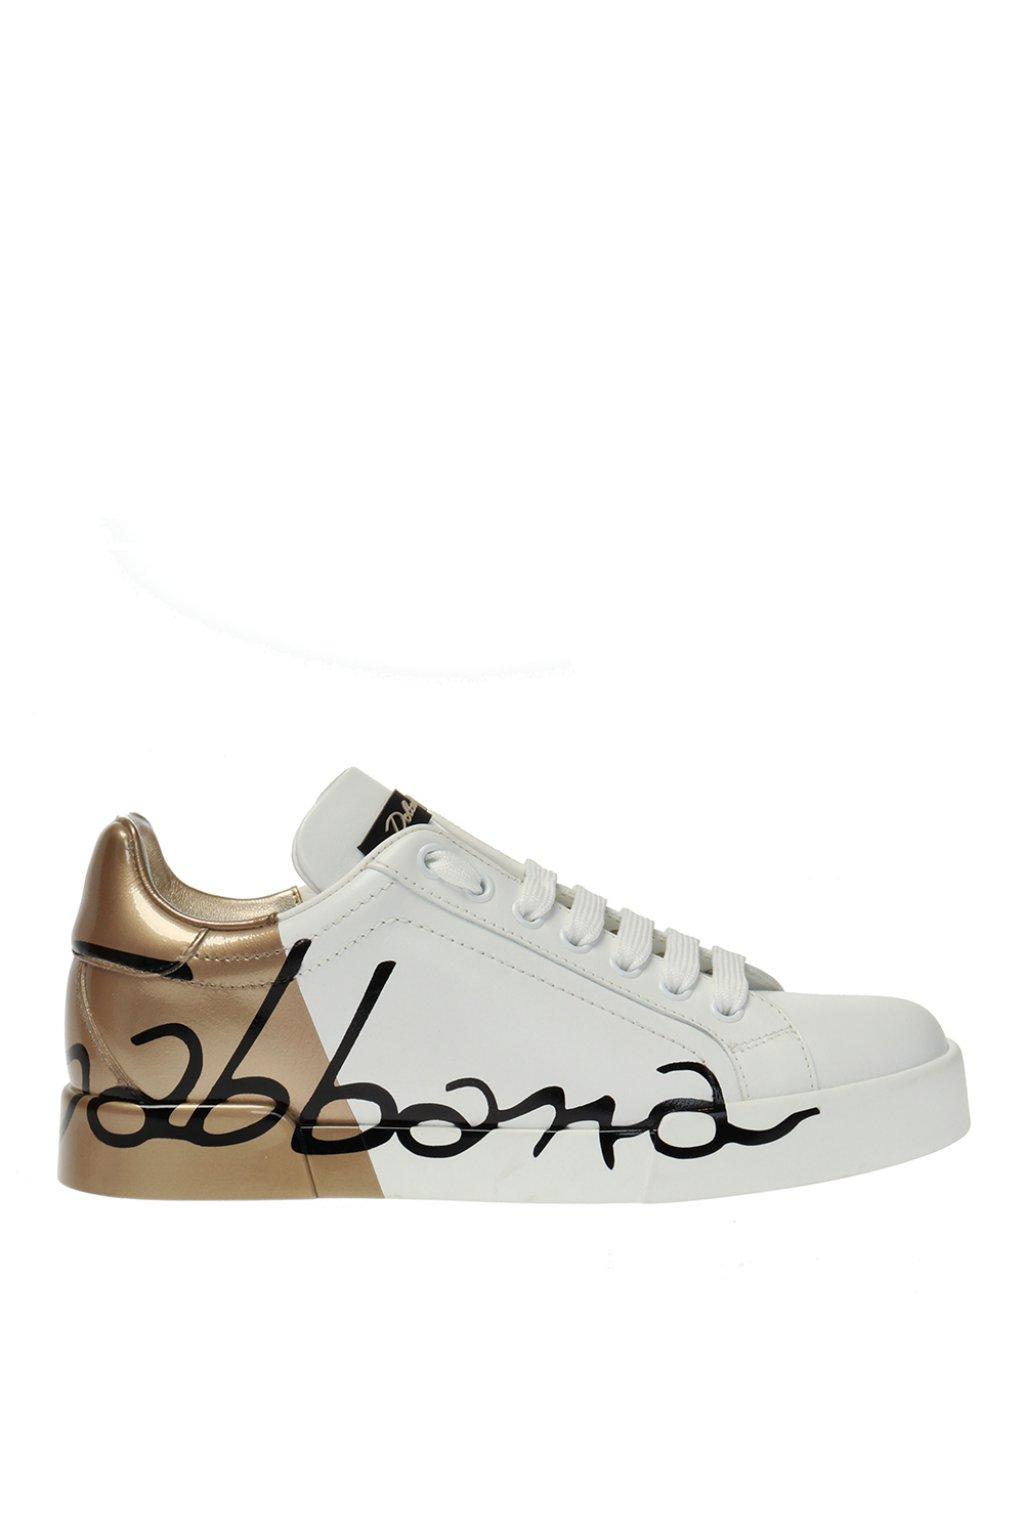 Dolce & Gabbana Gold Logo Printed Sneakers in White Lyst